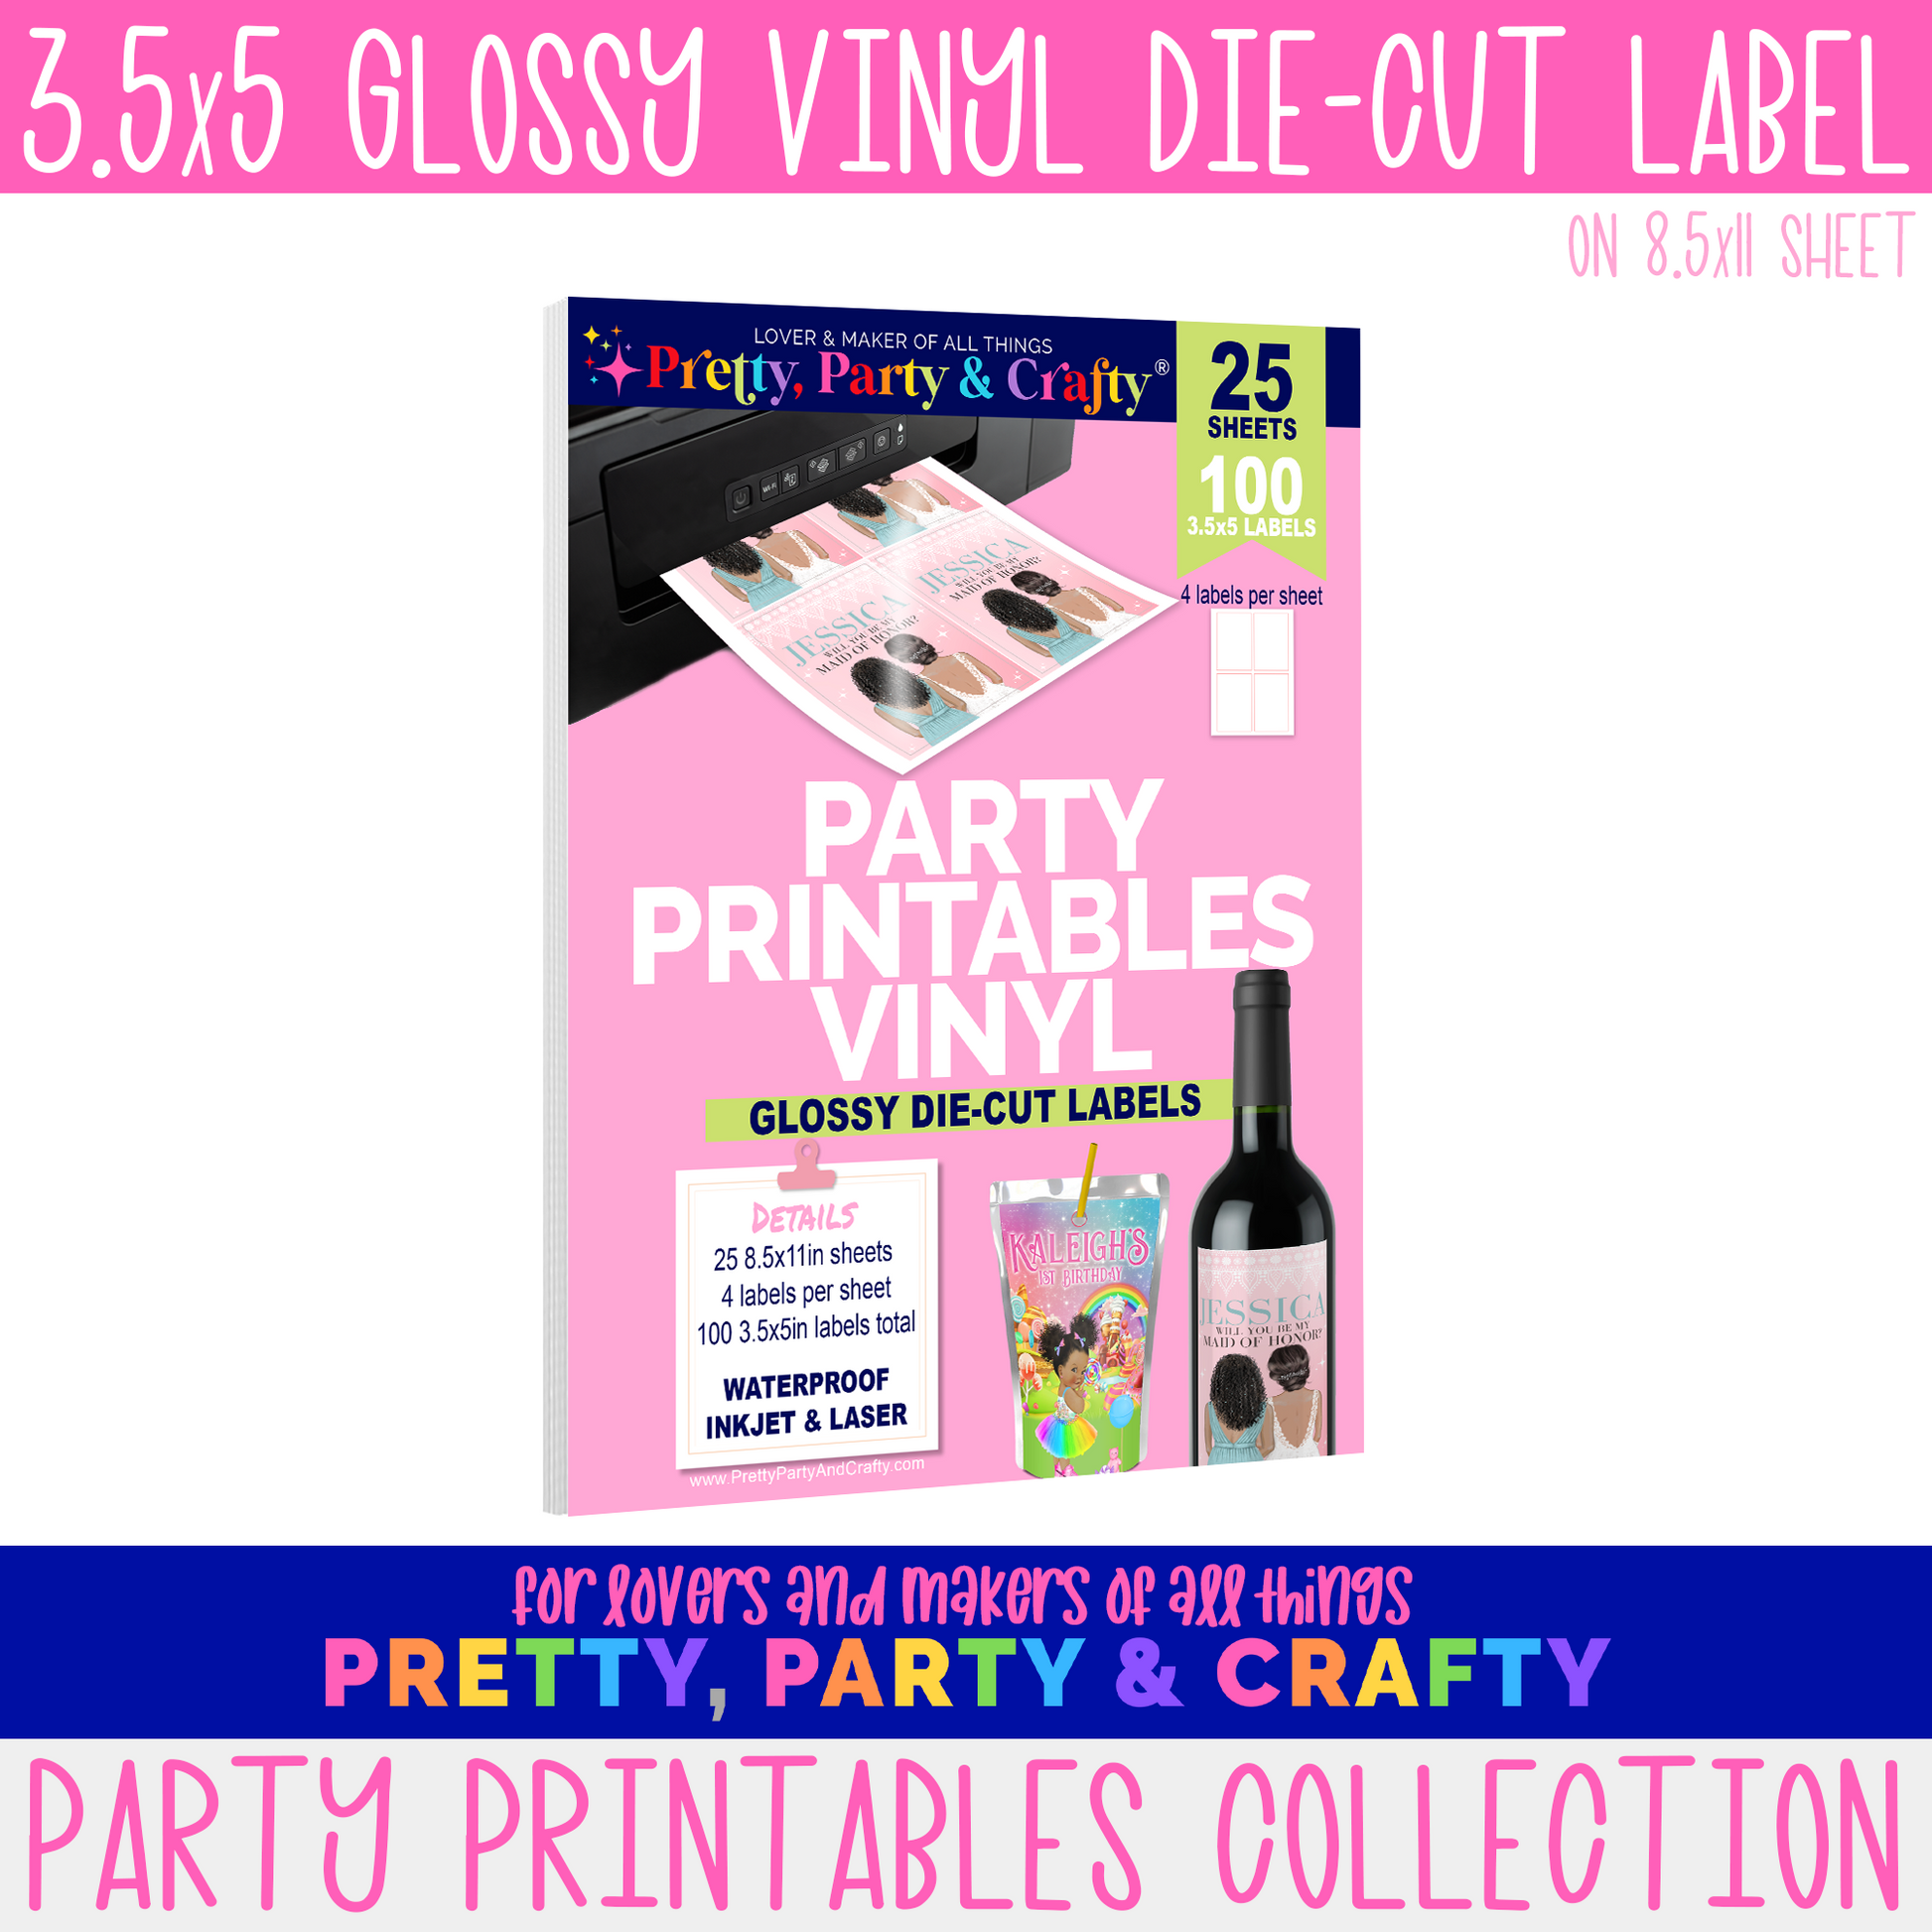 Printable Vinyl Glossy Sticker Paper with 25 Sheets